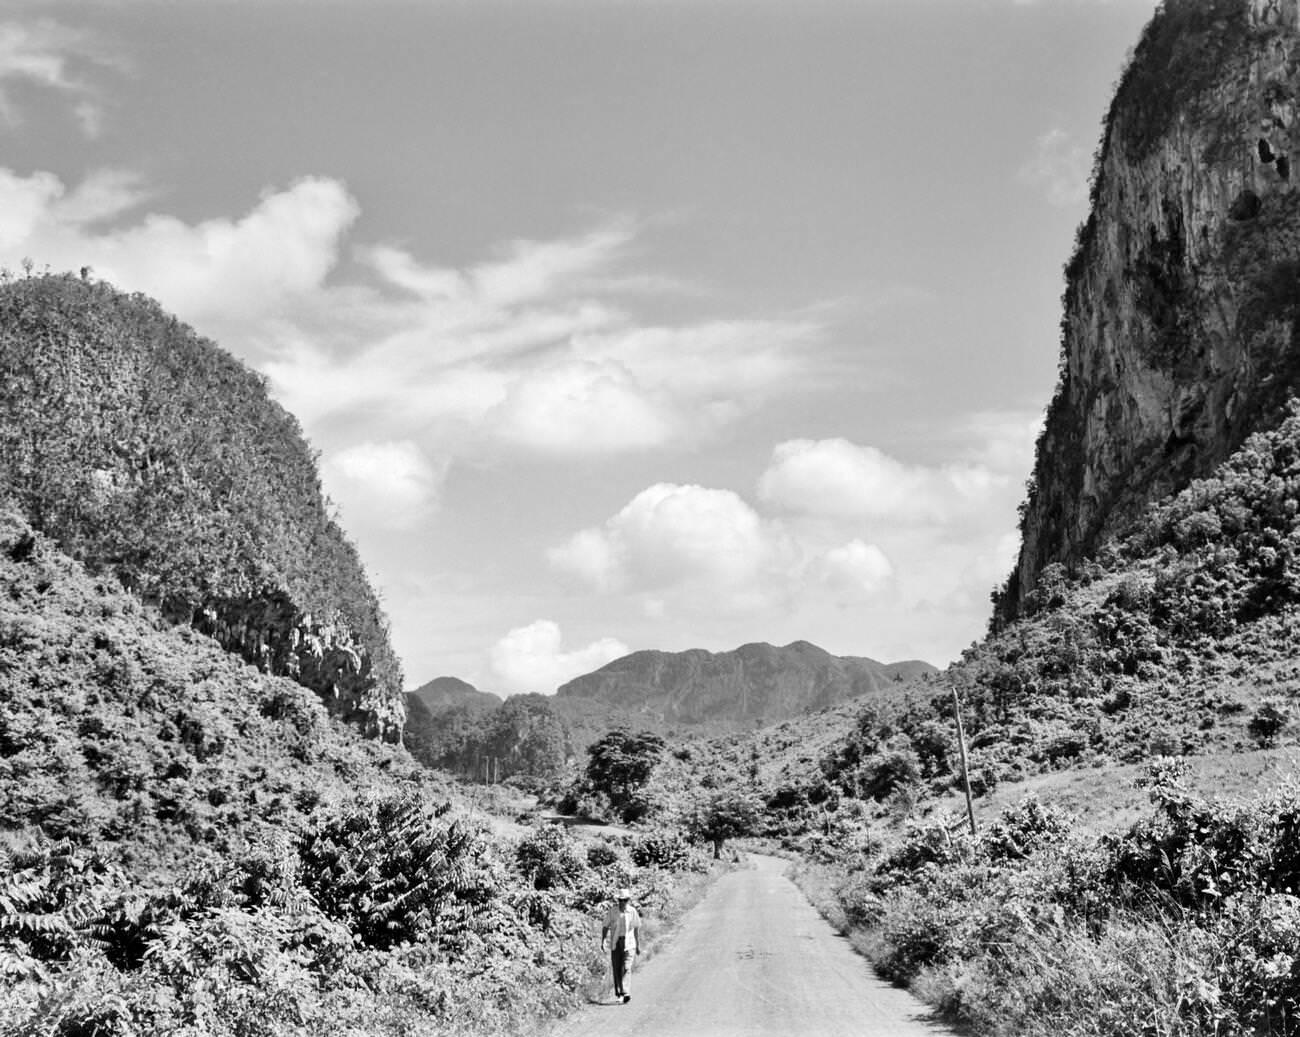 Rural Road Outside of Town of Vinales in Pinar del Rio Province, Cuba, 1950s